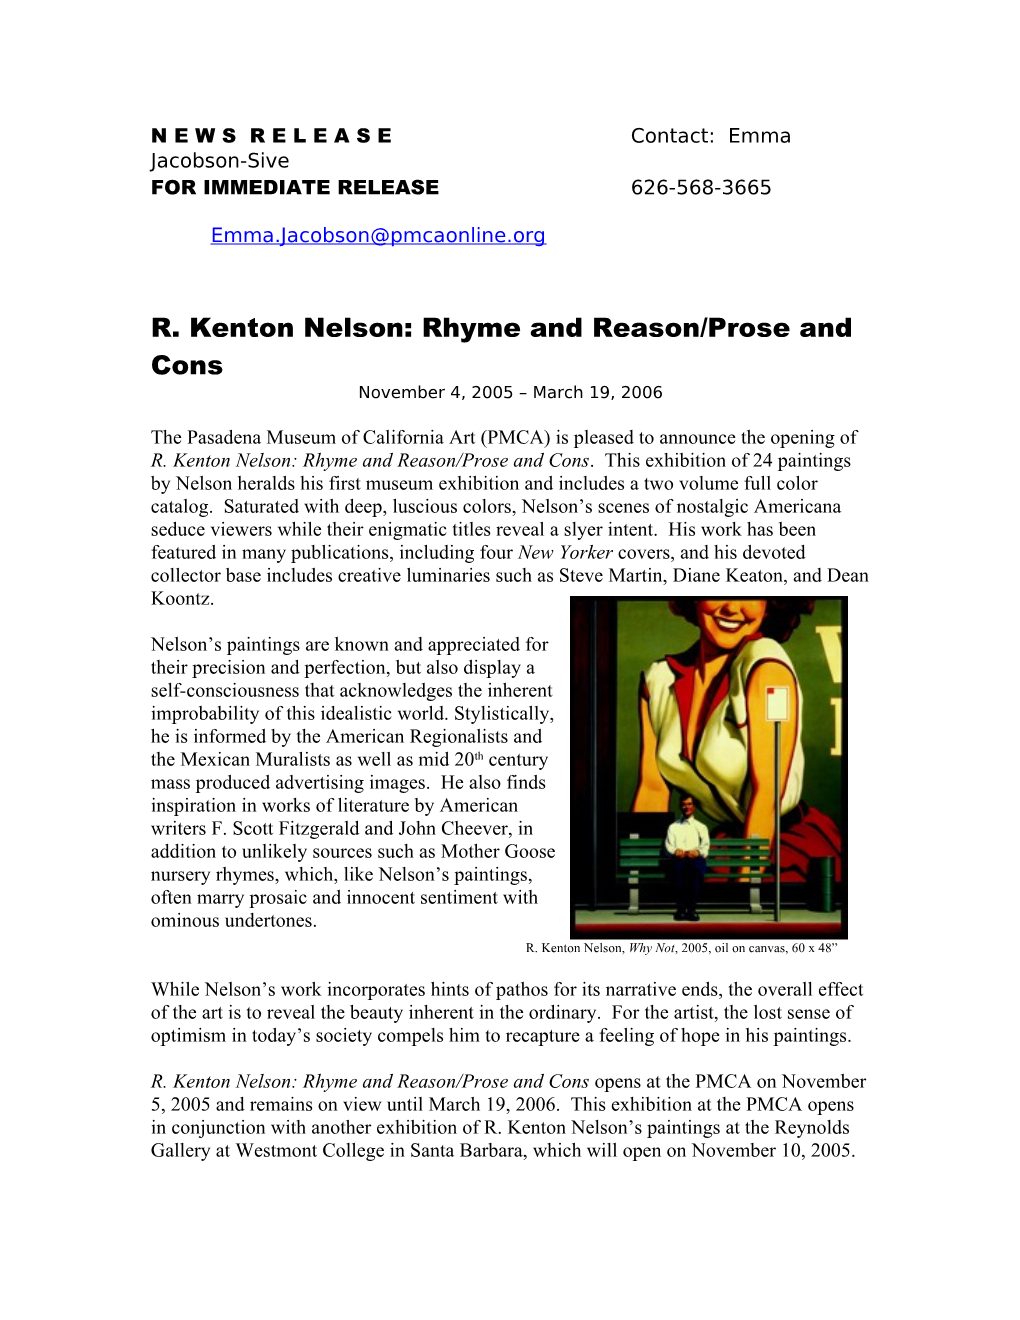 R. Kenton Nelson: Rhyme and Reason/Prose and Cons